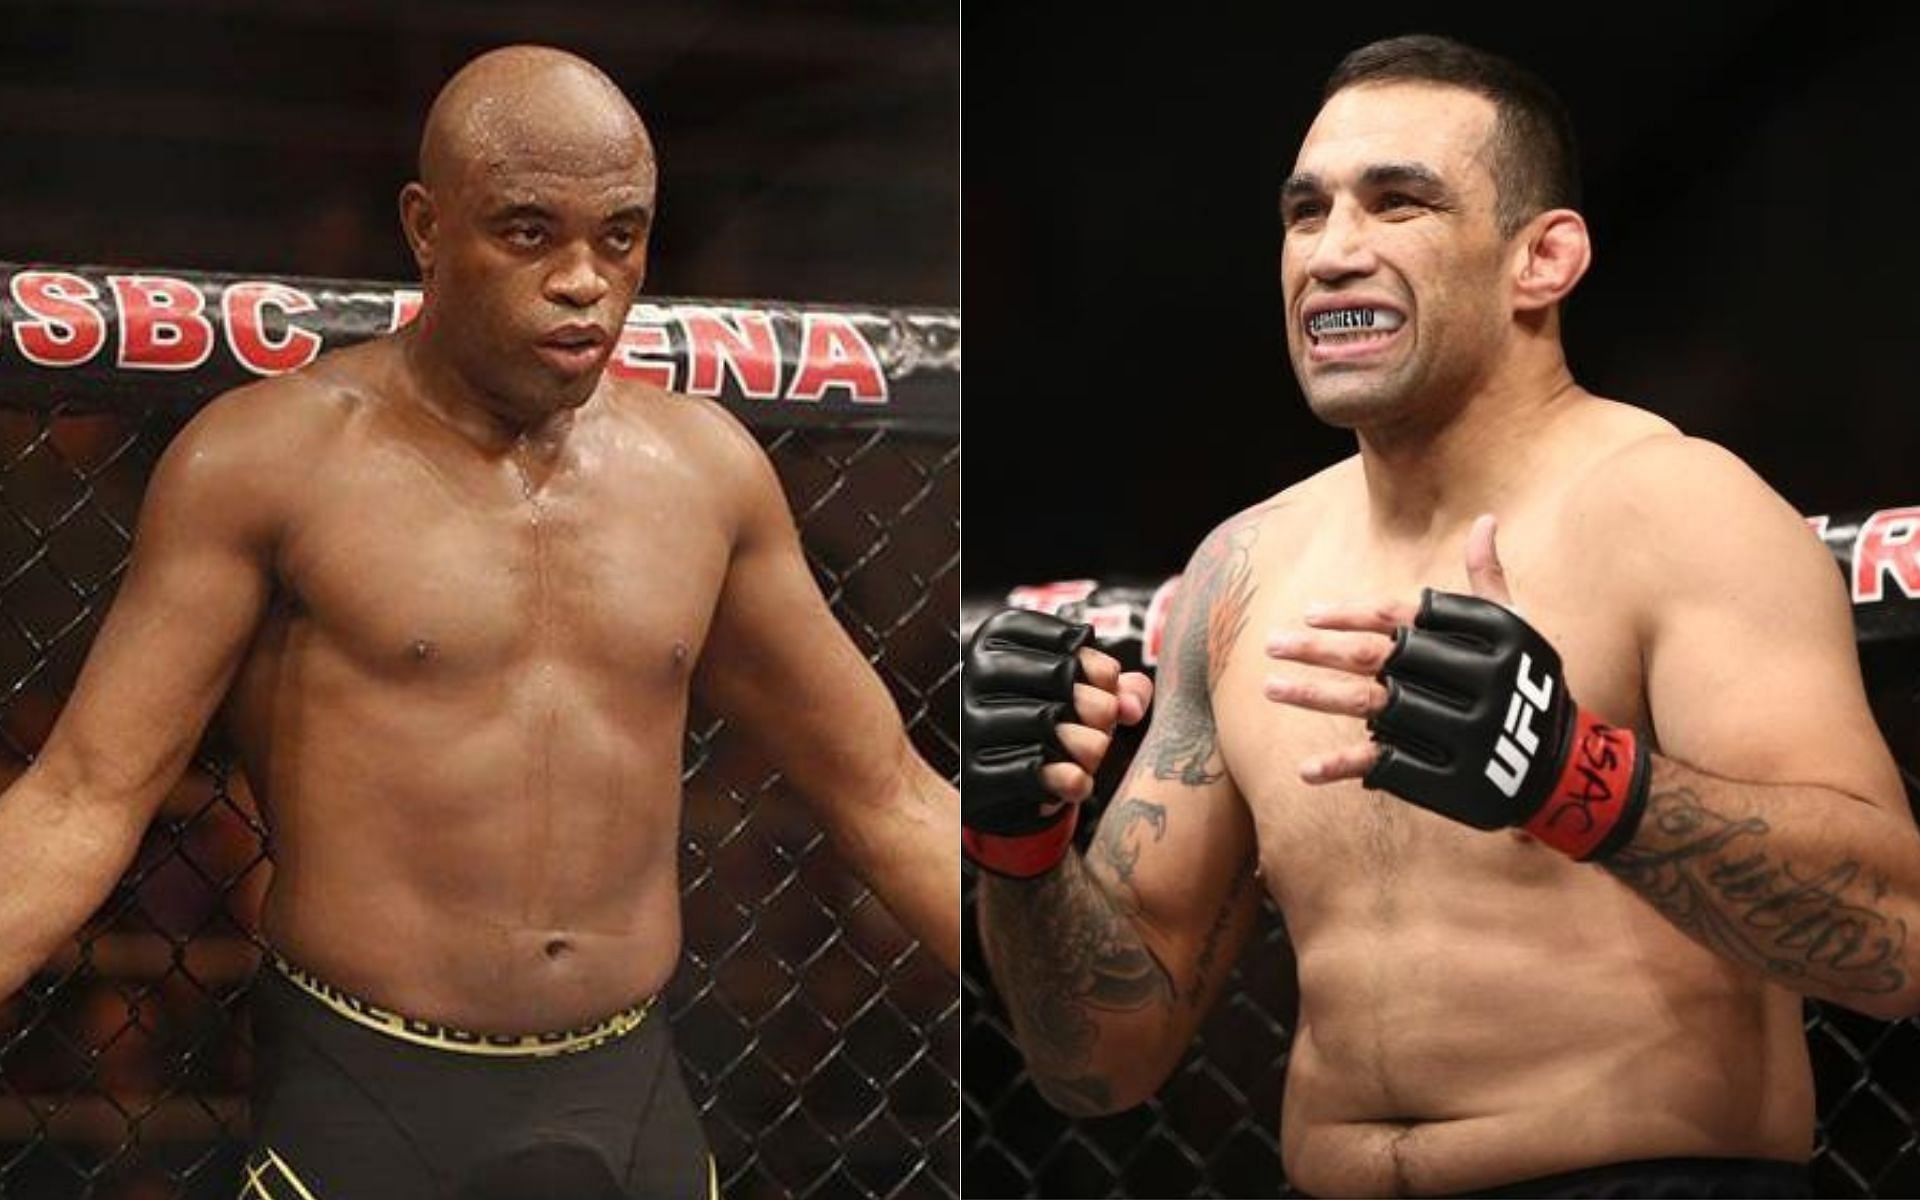 Anderson Silva and Fabricio Werdum both shocked fans when they tested positive for PED&#039;s